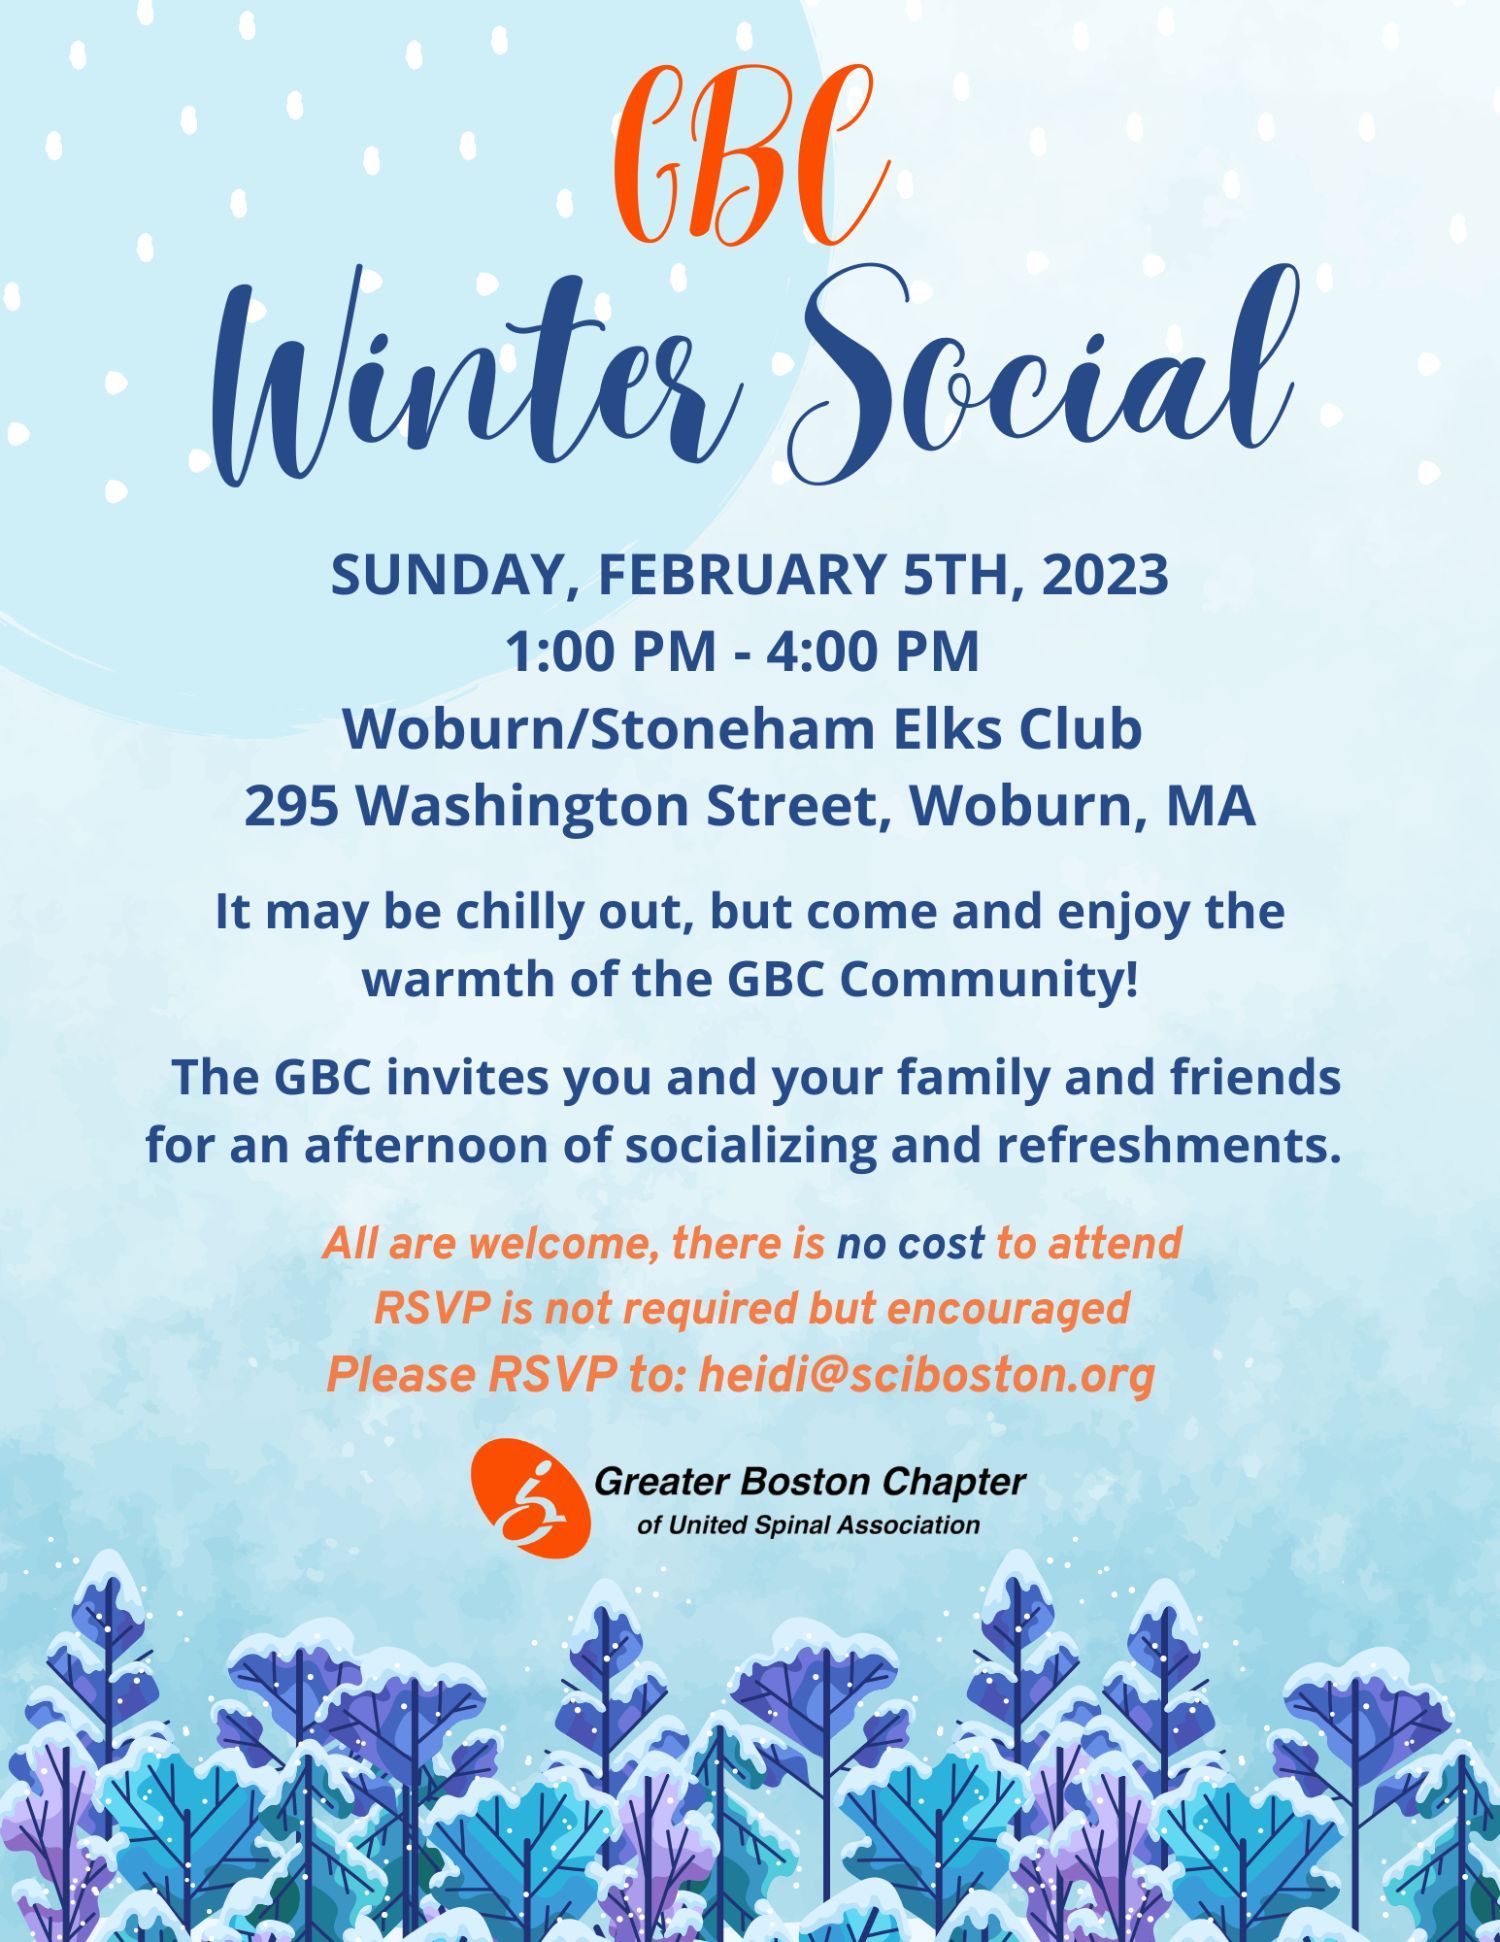 Flyer description: a winter backdrop with multicolored plants at the bottom with snow on top. Text reading: gbc an winter social. Sunday, February 5, 2023, 1 PM-4 PM, woburn/Stoneham Elks club, 295 Washington St., Woburn, MA. It may be chilly out, but come in enjoy the warmth of the gbc community! The gbc invite you and your family and friends for an afternoon of socializing and refreshments. All are welcome, there is no cost to attend RSVP is not required but encourage. Please RSVP to: Heidi@sciboston.org